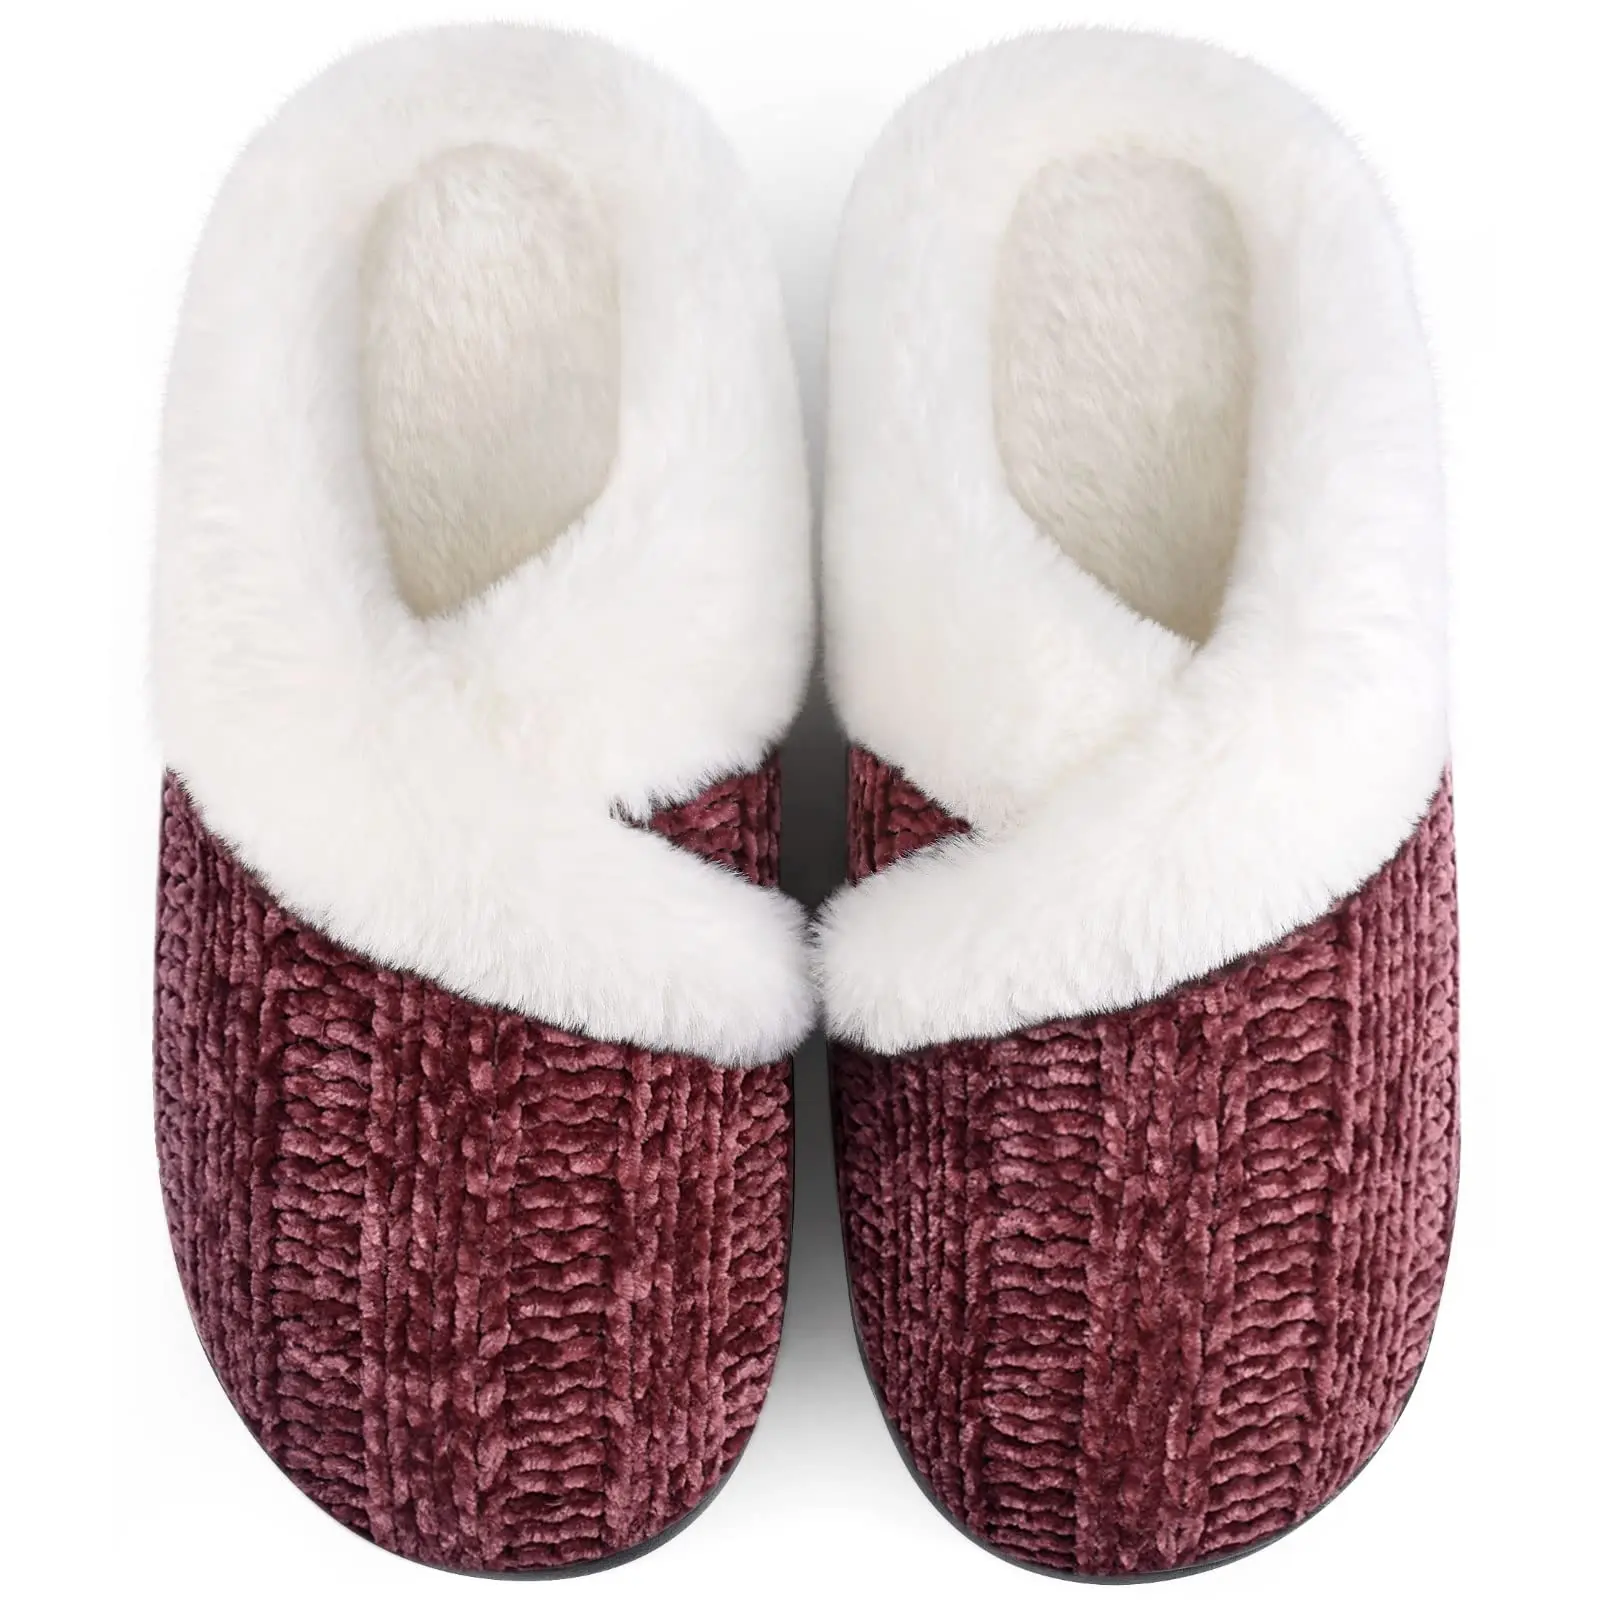 

household fish mouth slippers Women's Slip on Fuzzy House Slippers Memory Foam Slipper Scuff Outdoor Indoor Warm Plush Bedroom, Solid color